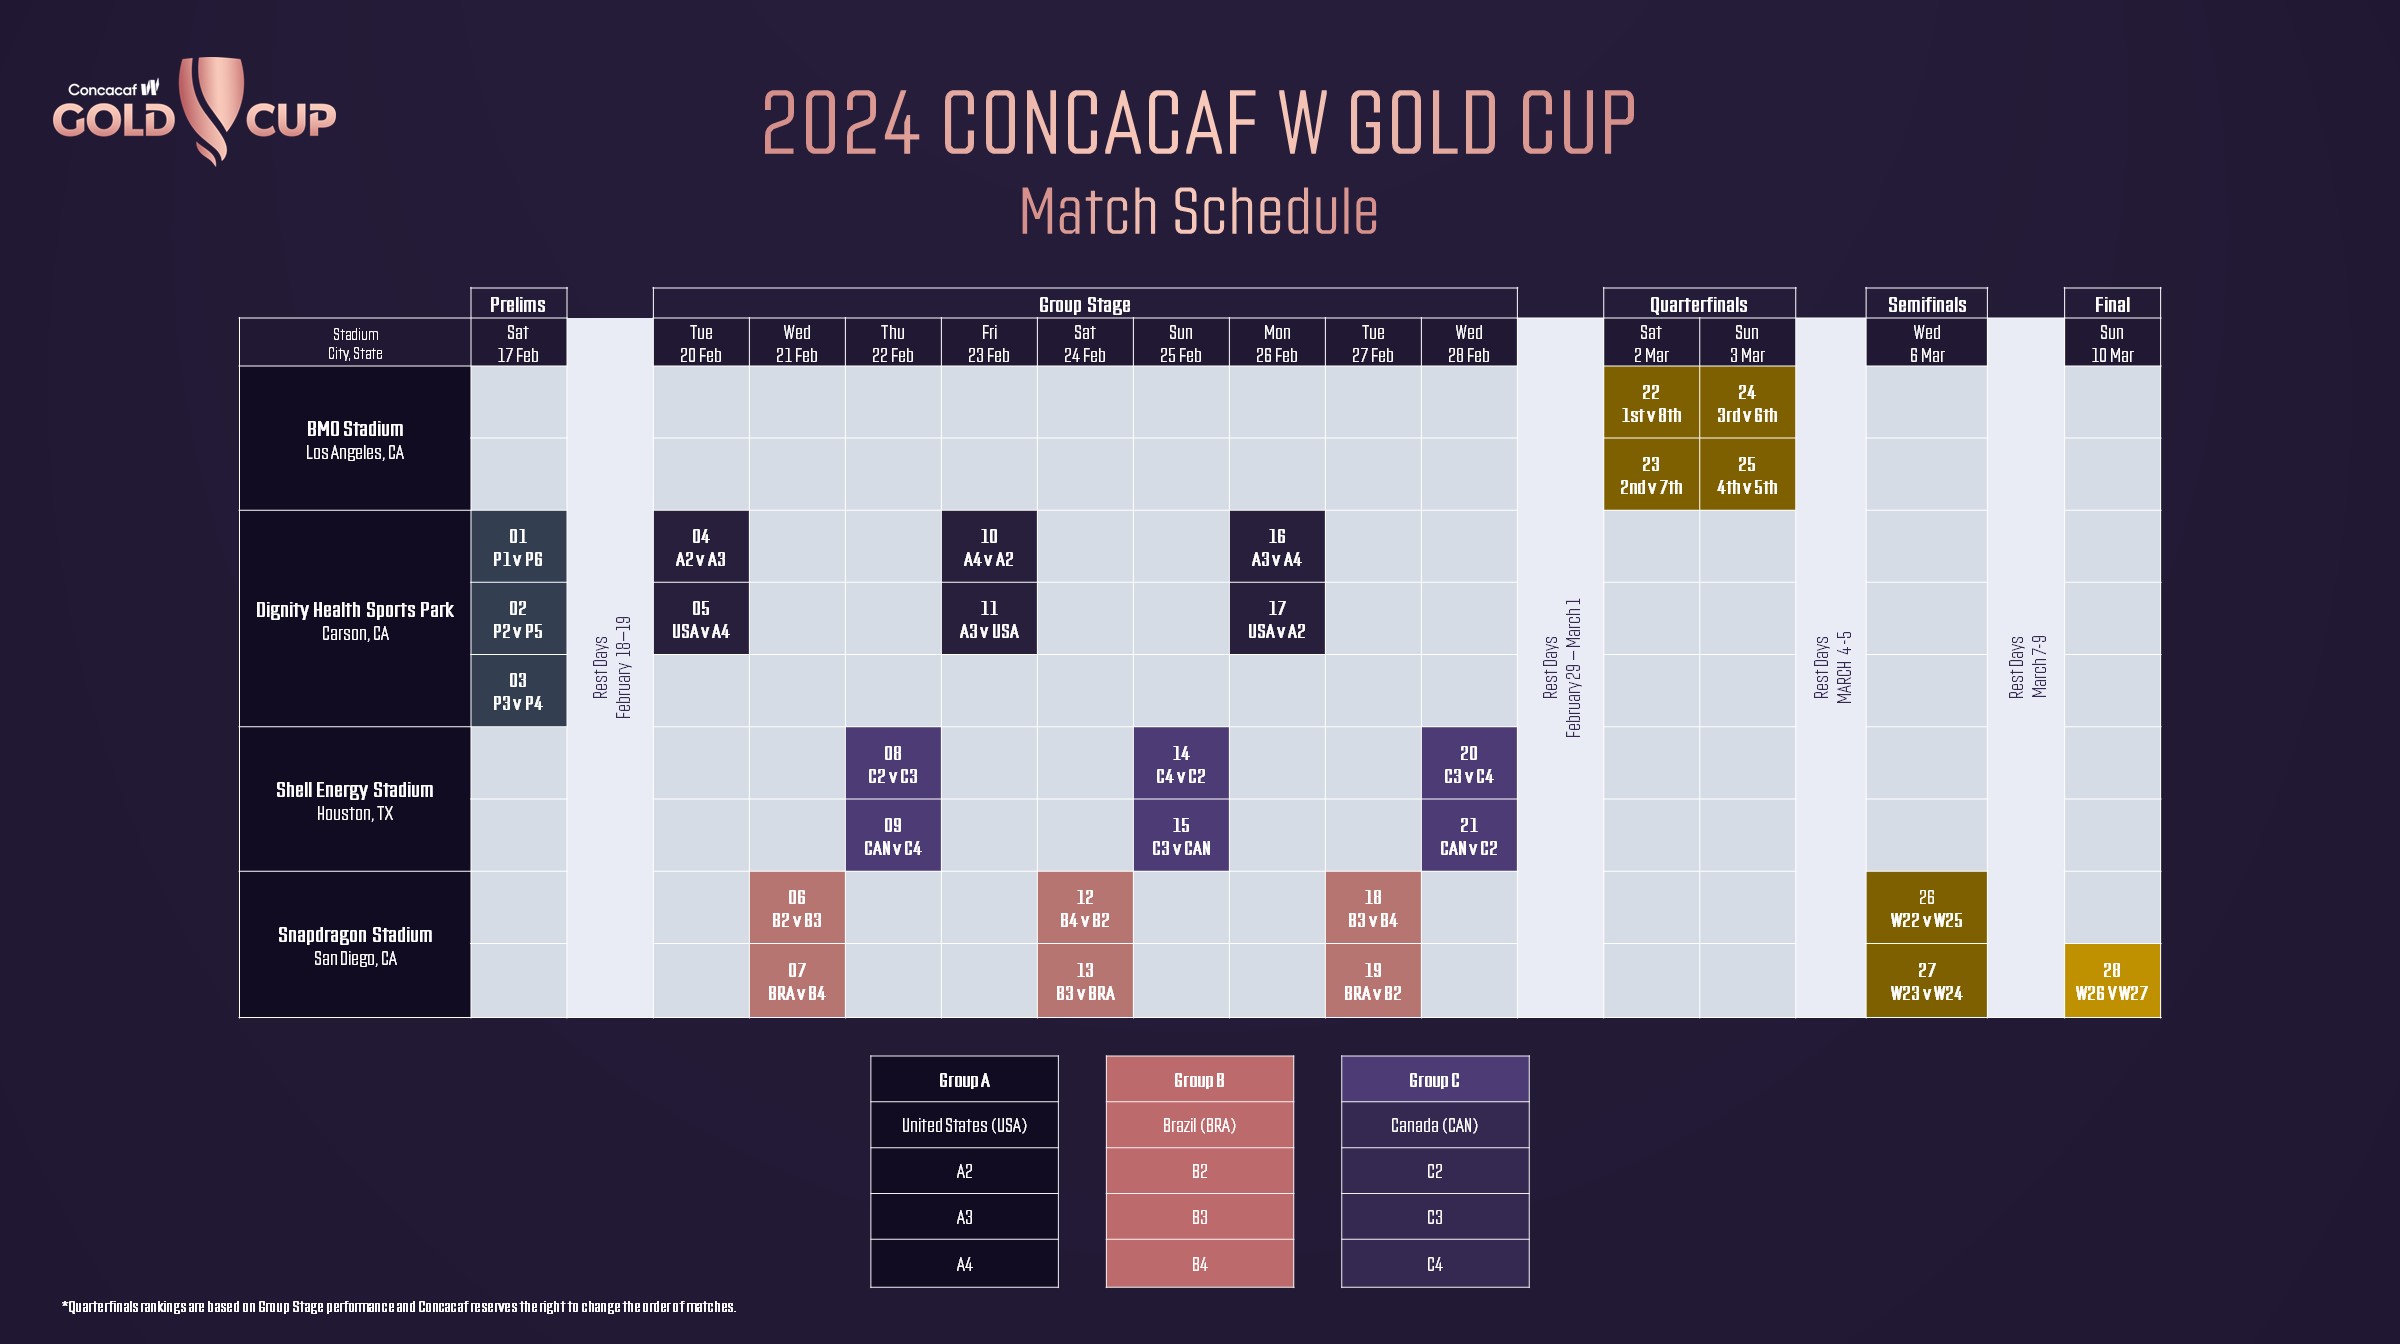 Concacaf announces host venues and match schedule for 2024 Concacaf W